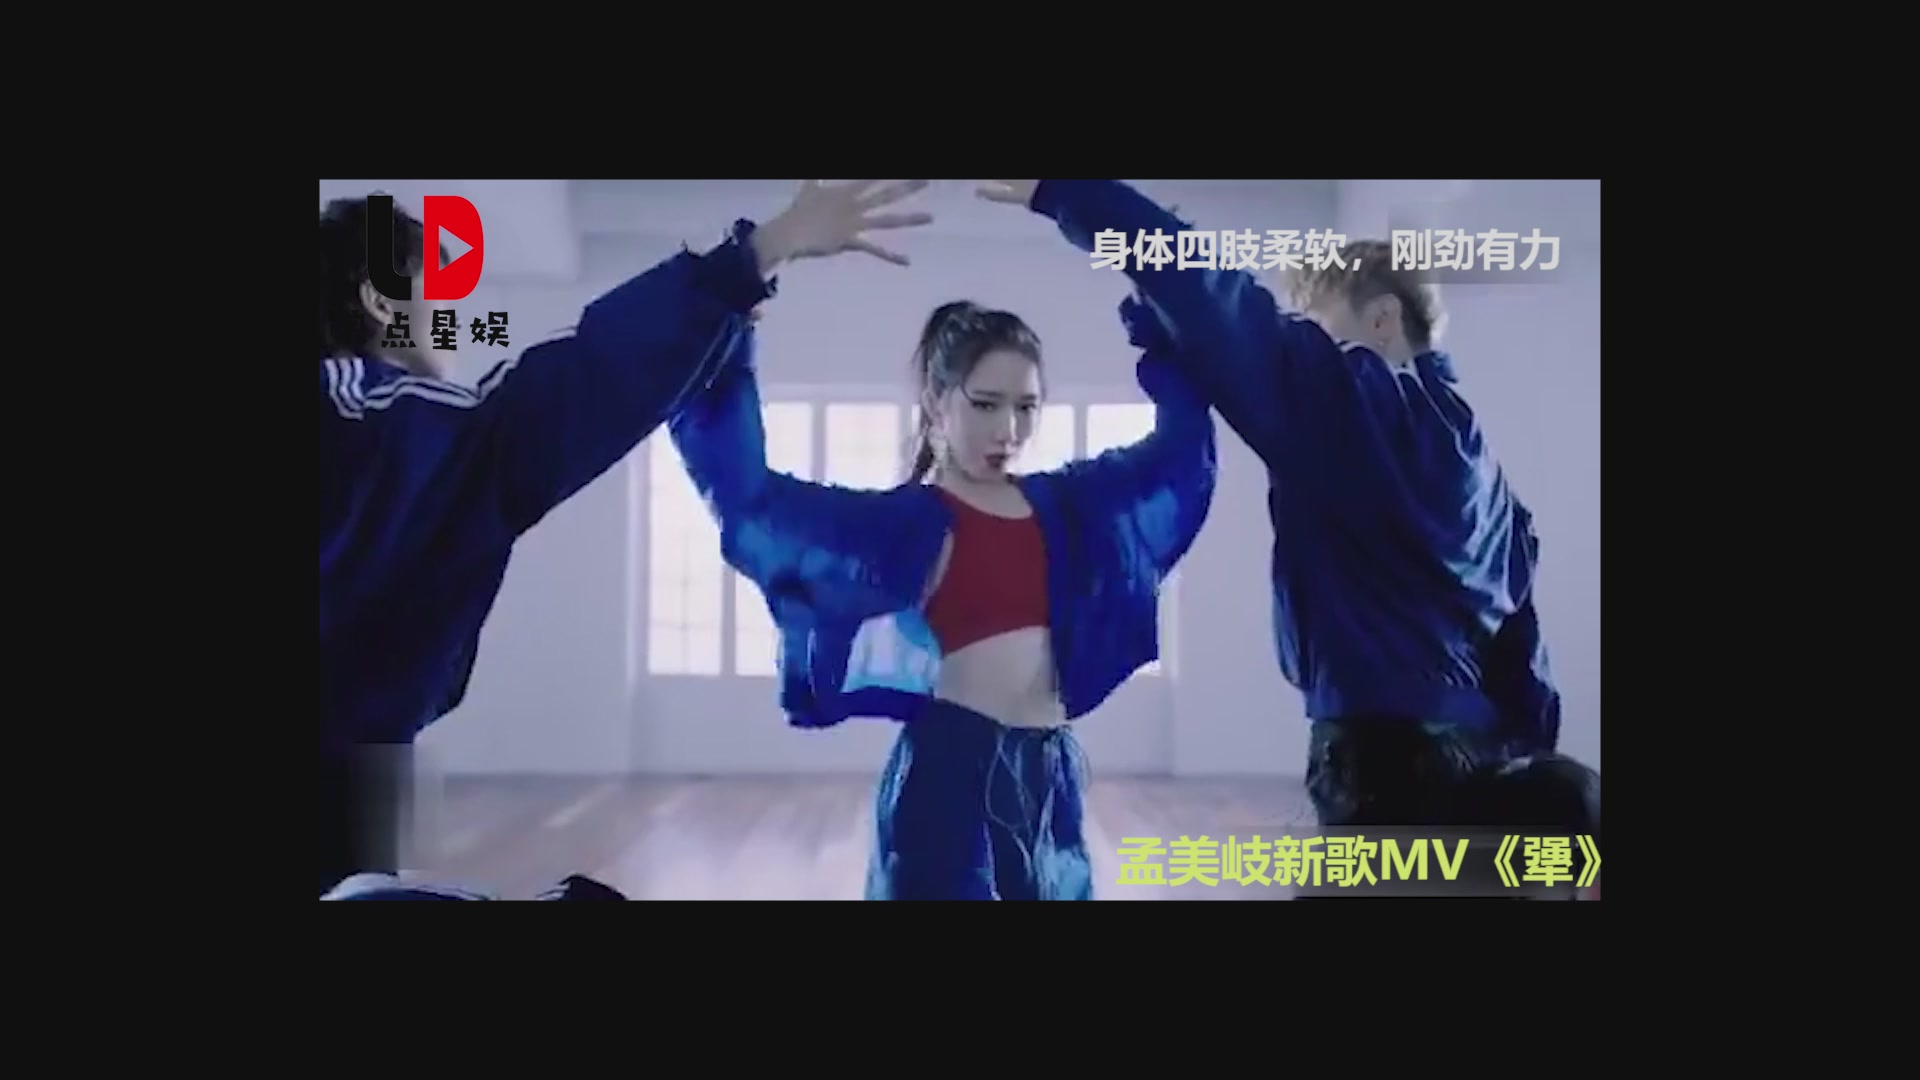 Meng Meiqi's new song "Xia" released the dance version MV